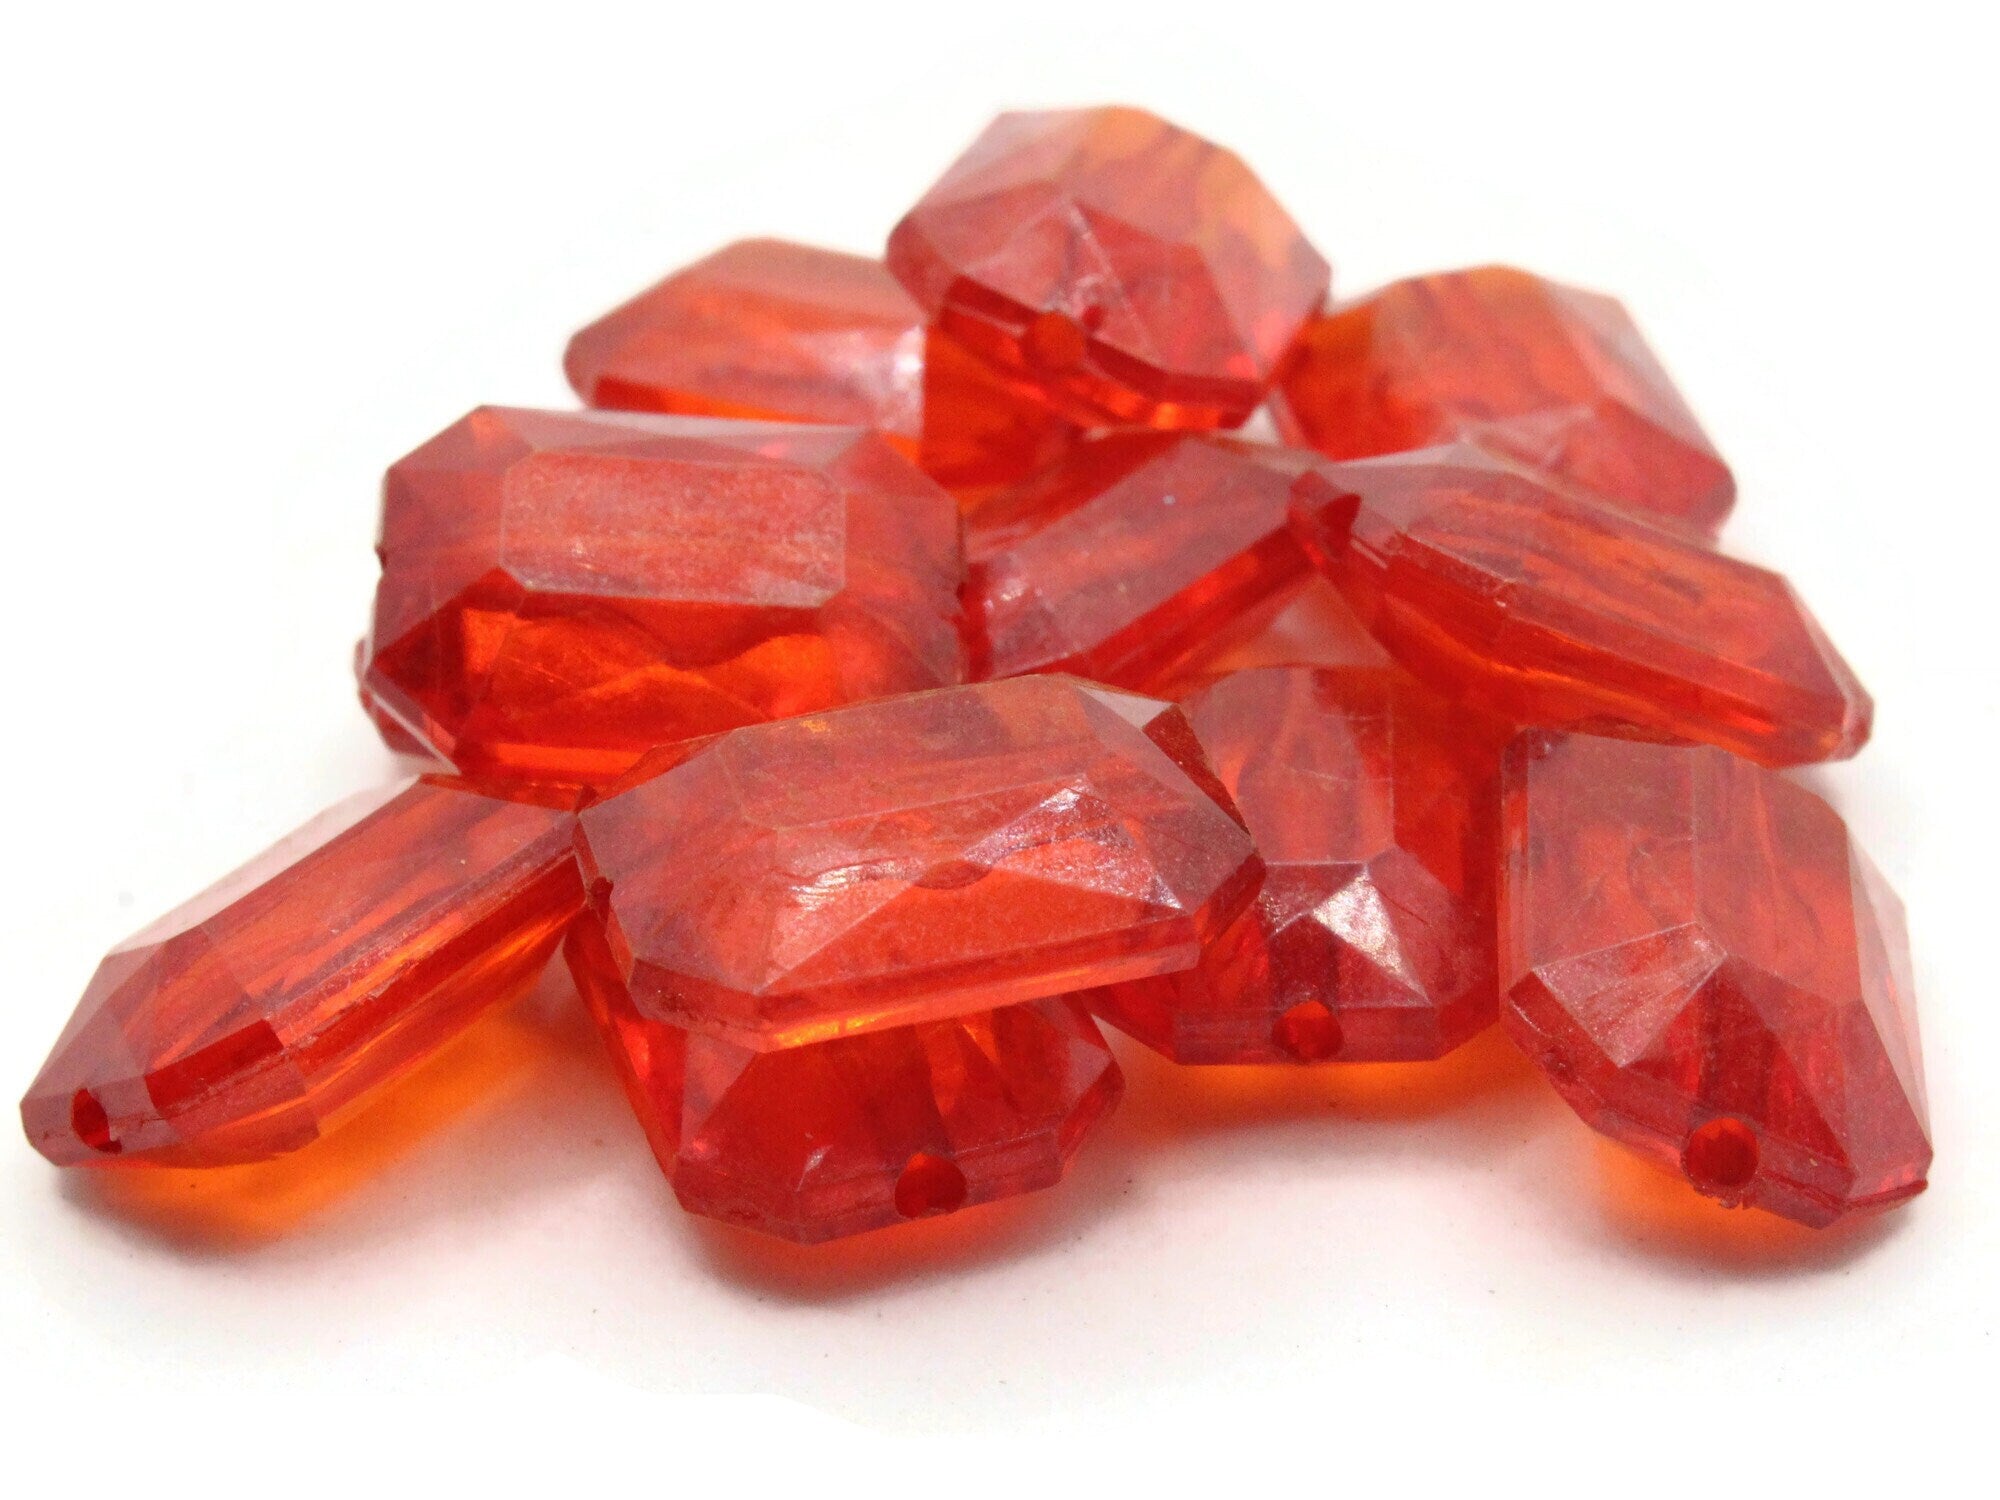 12 18mm Red Acrylic Gems - Rectangle Jewel Beads by Smileyboy Beads | Michaels